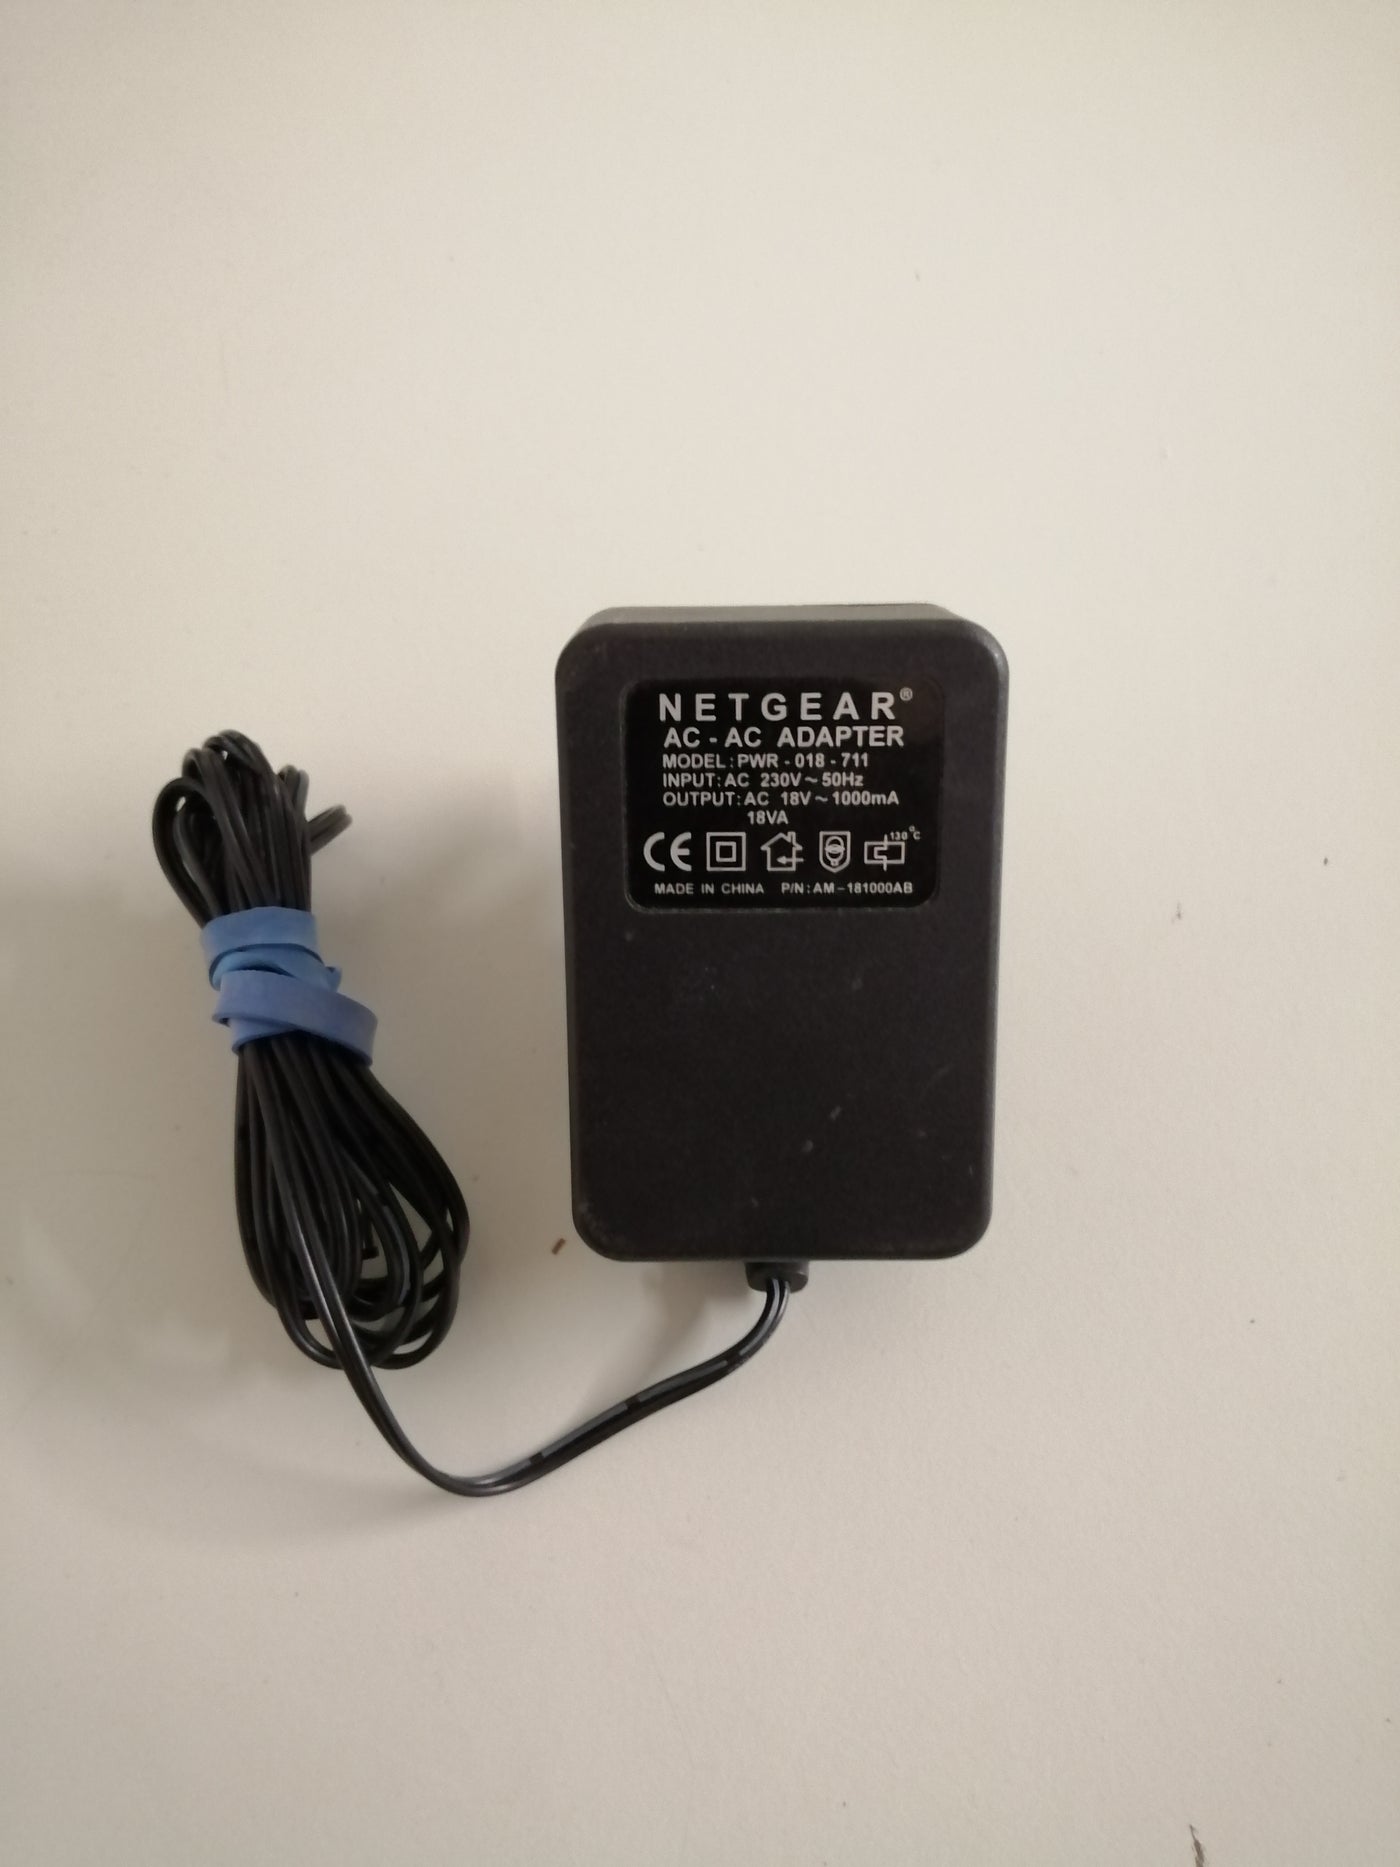 NETGEAR AC ADAPTER PWR -018-711 IN 230V OUT 18V ( PWR-018-711 USED )